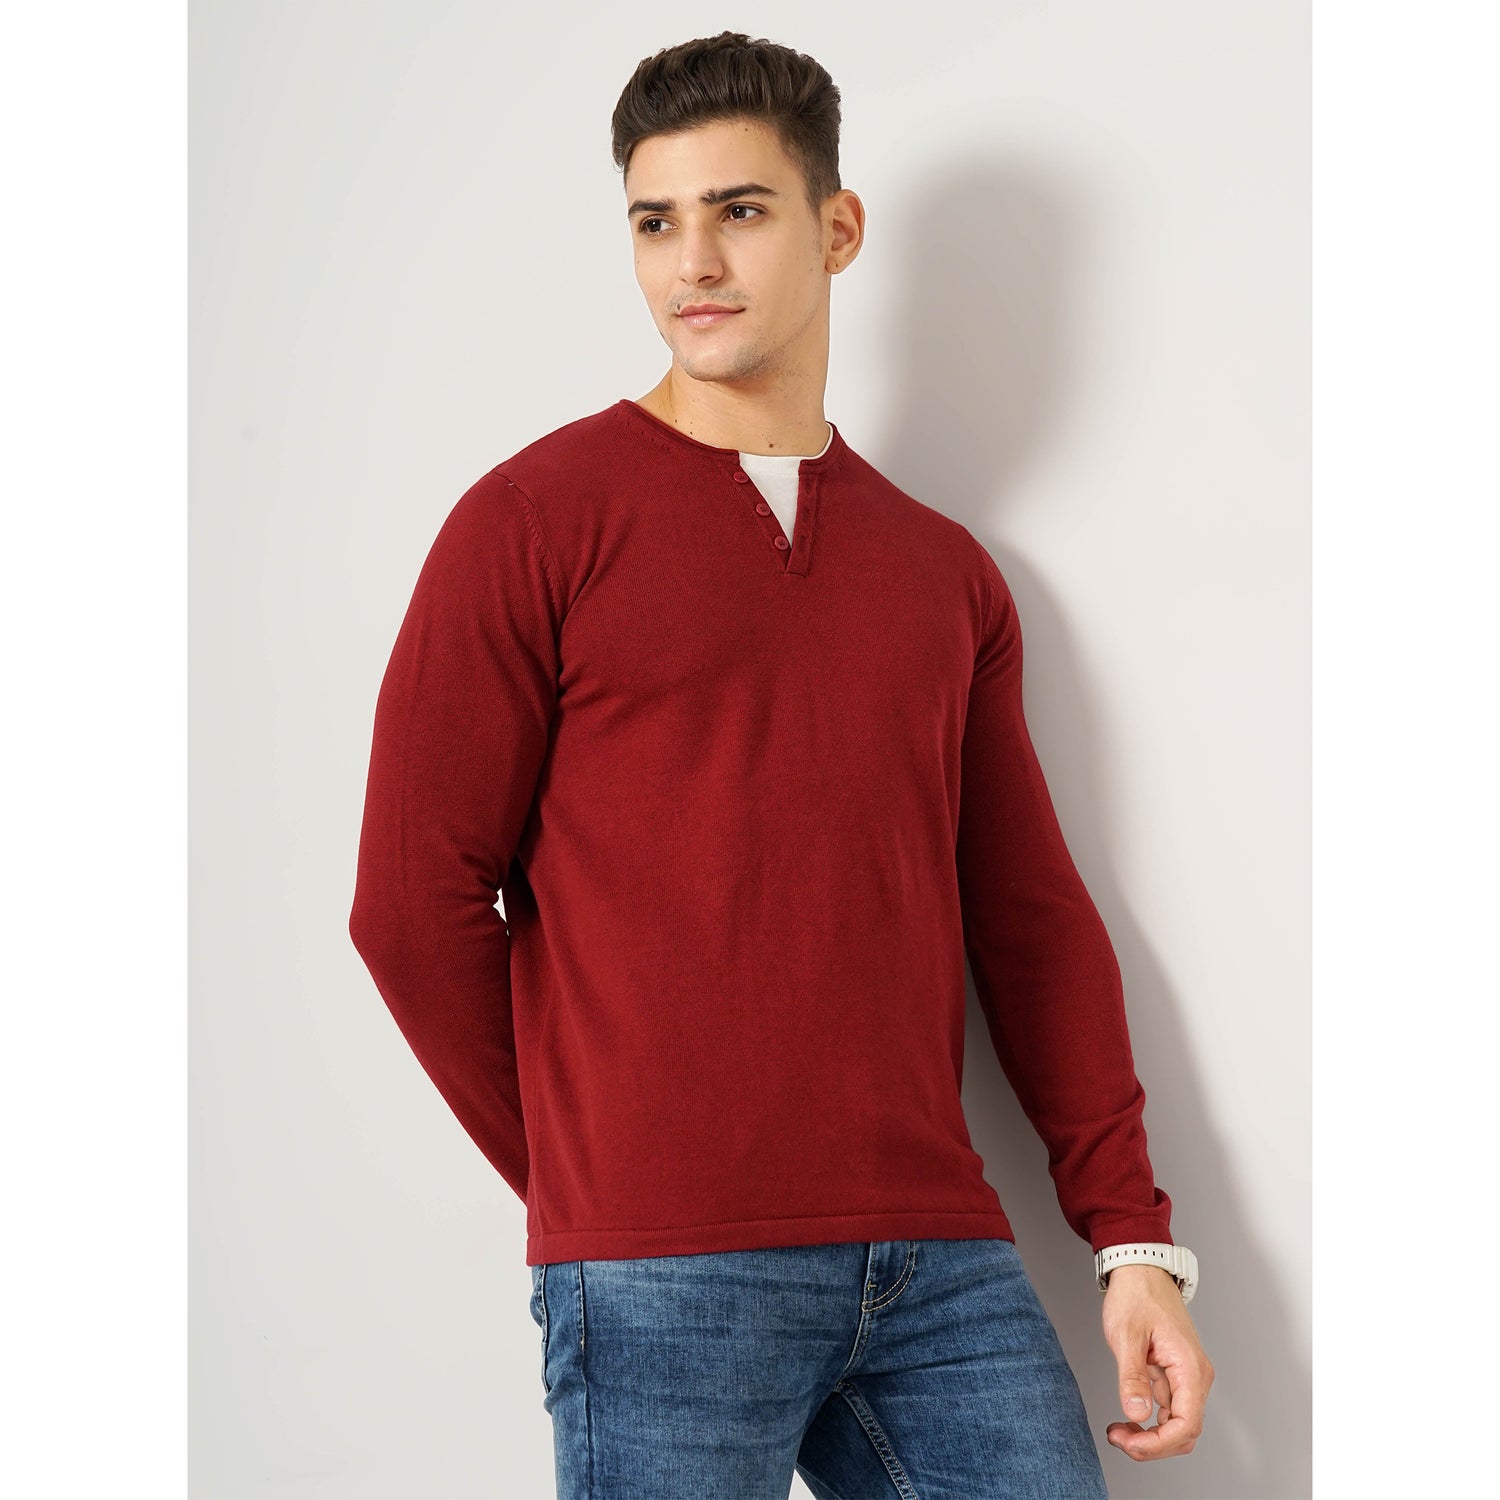 Maroon Cotton Basic Solid Sweaters